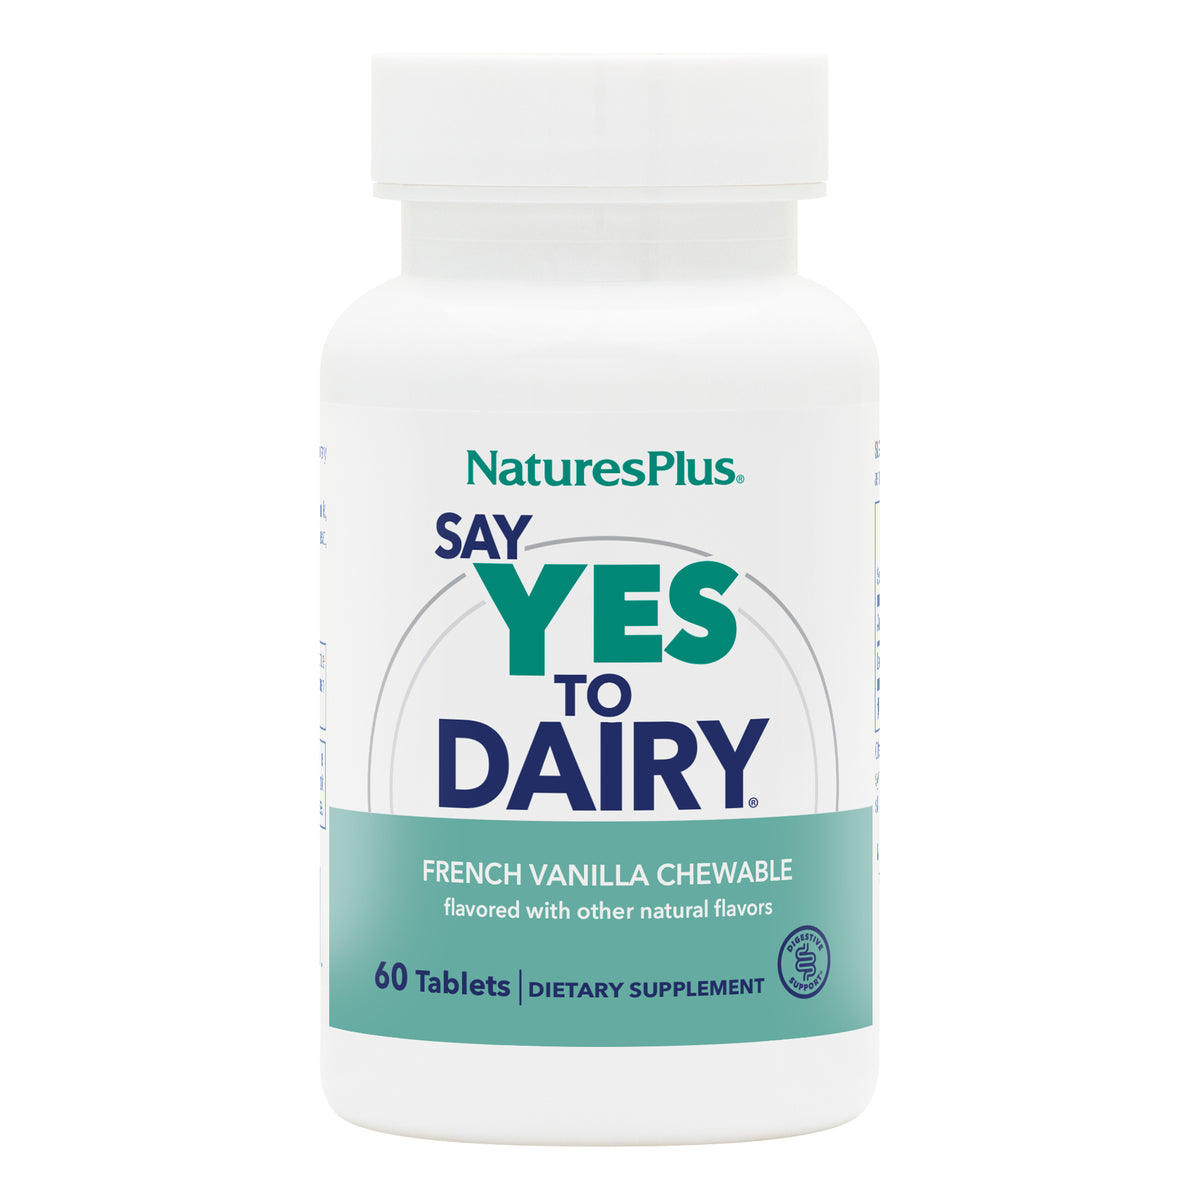 product image of Say Yes to Dairy® Chewables containing Say Yes to Dairy® Chewables